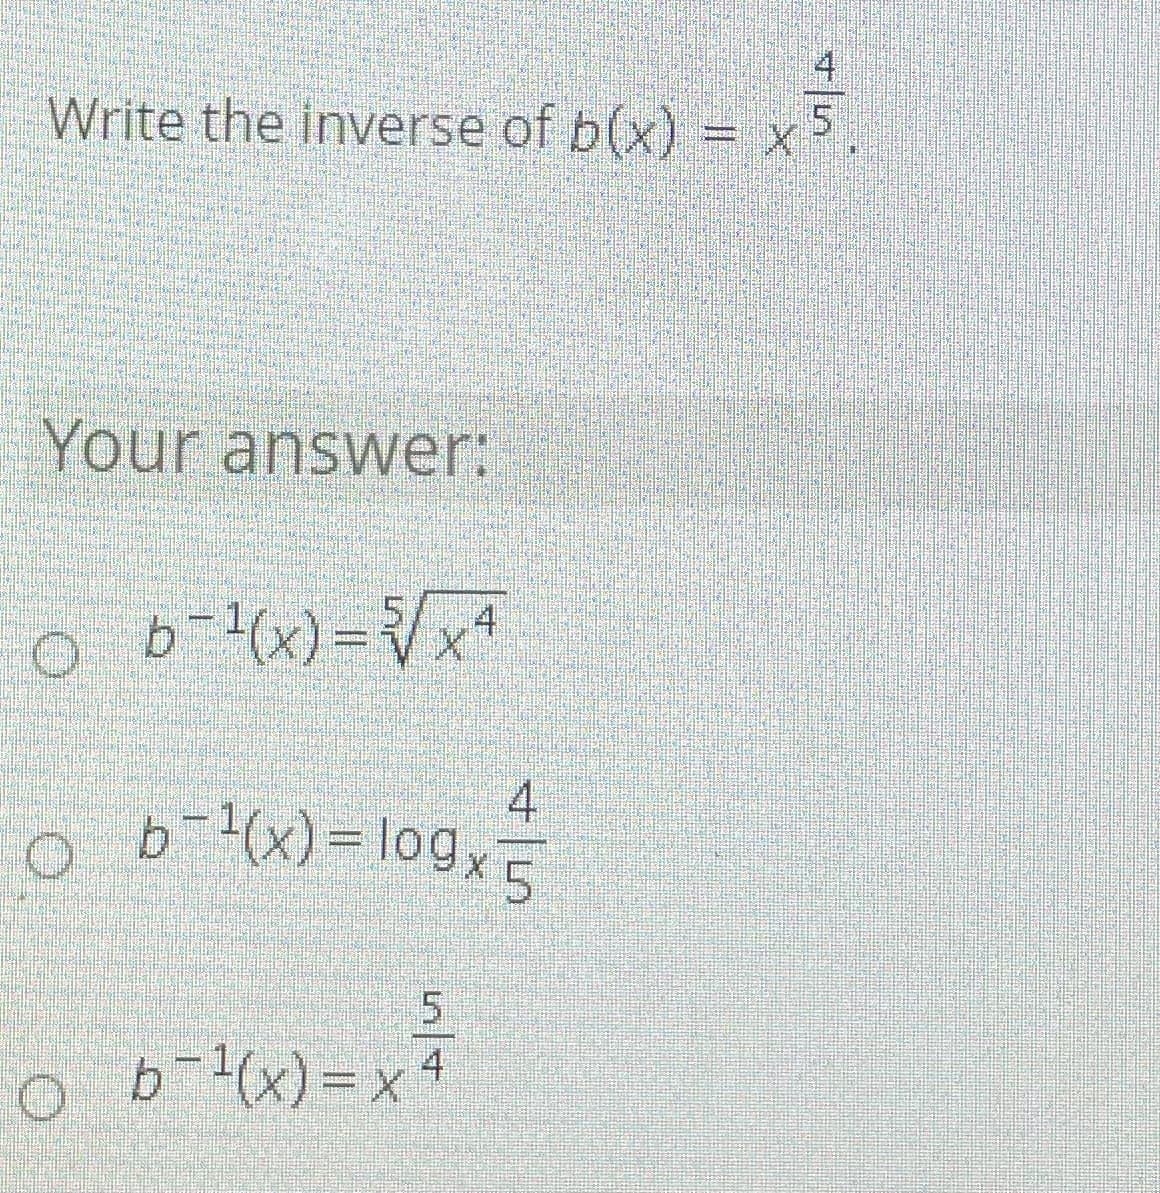 ### Question: 
Write the inverse of \( b(x) = x^{\frac{4}{5}} \).

### Your Answer:
- ∘ \( b^{-1}(x) = \sqrt[5]{x^4} \)
- ∘ \( b^{-1}(x) = \log_x \frac{4}{5} \)
- ∘ \( b^{-1}(x) = x^{\frac{5}{4}} \)

---

In this problem, you are asked to find the inverse of the function \( b(x) = x^{\frac{4}{5}} \). Three options for the inverse function \( b^{-1}(x) \) are provided. 

The correct approach is to make \(y = b(x)\) and solve for \(x\) in terms of \(y\). This involves the following steps:

1. Set \( y = x^{\frac{4}{5}} \).
2. To solve for \( x \), raise both sides to the reciprocal power of \(\frac{4}{5}\), which is \(\frac{5}{4}\):
\[ x = y^{\frac{5}{4}} \]
3. Therefore, the inverse function is \( b^{-1}(x) = x^{\frac{5}{4}} \).

This analysis helps explain why the third option is the correct answer.